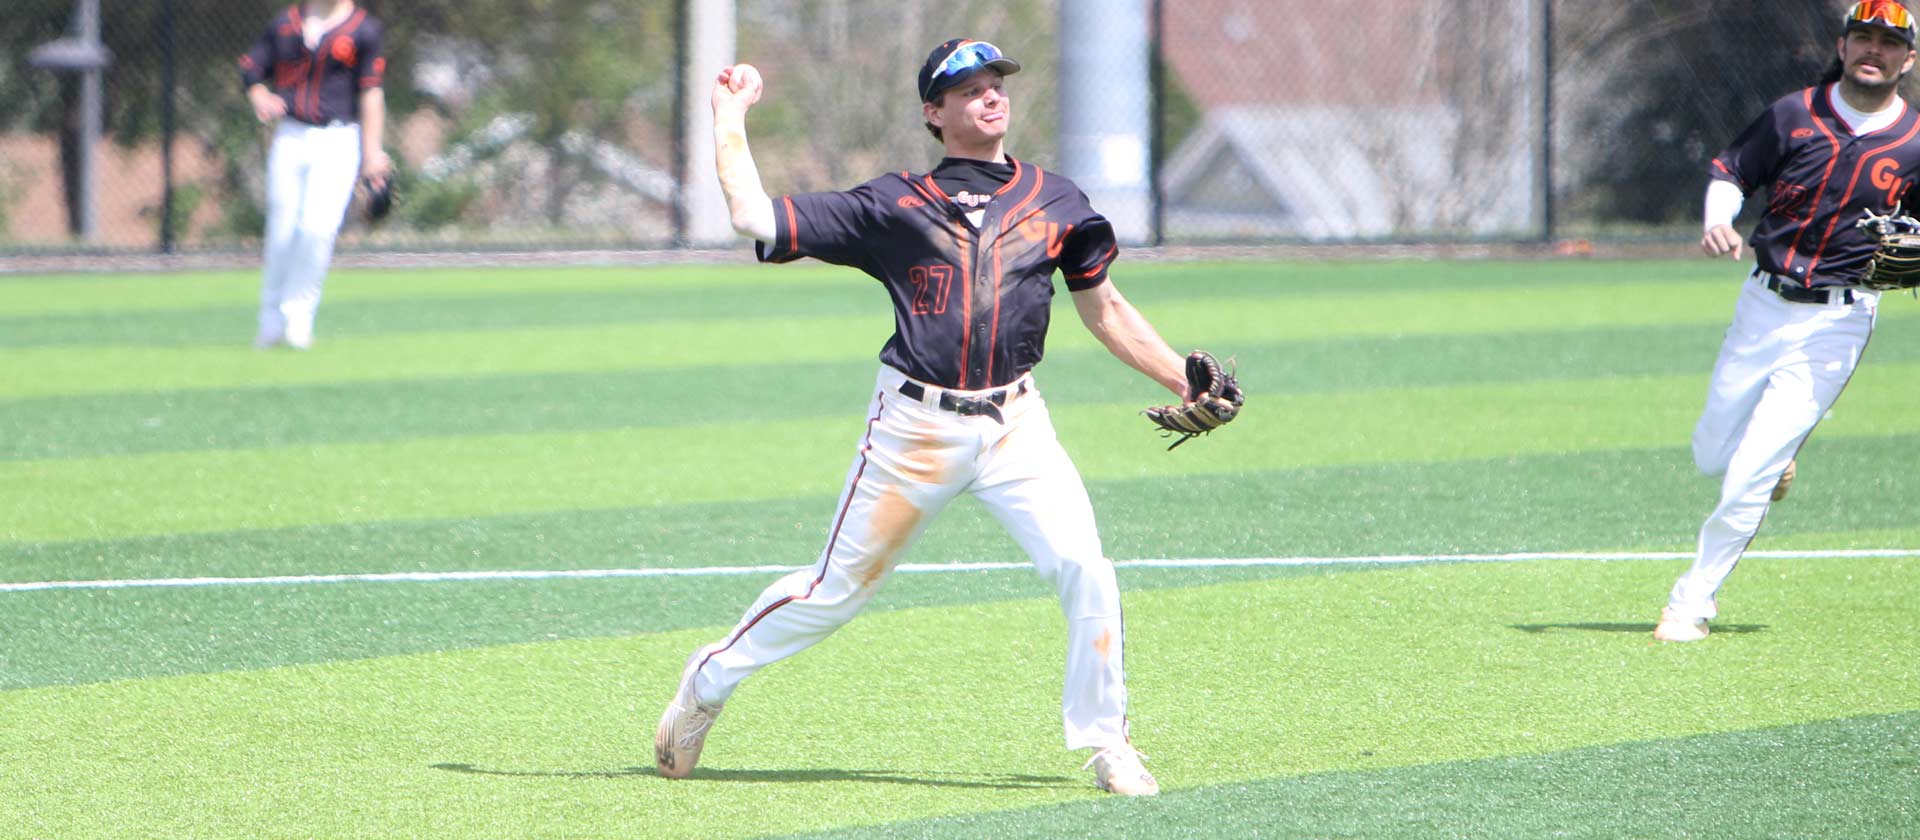 Baseball falls 4-3 to St. Norbert in Friday contest